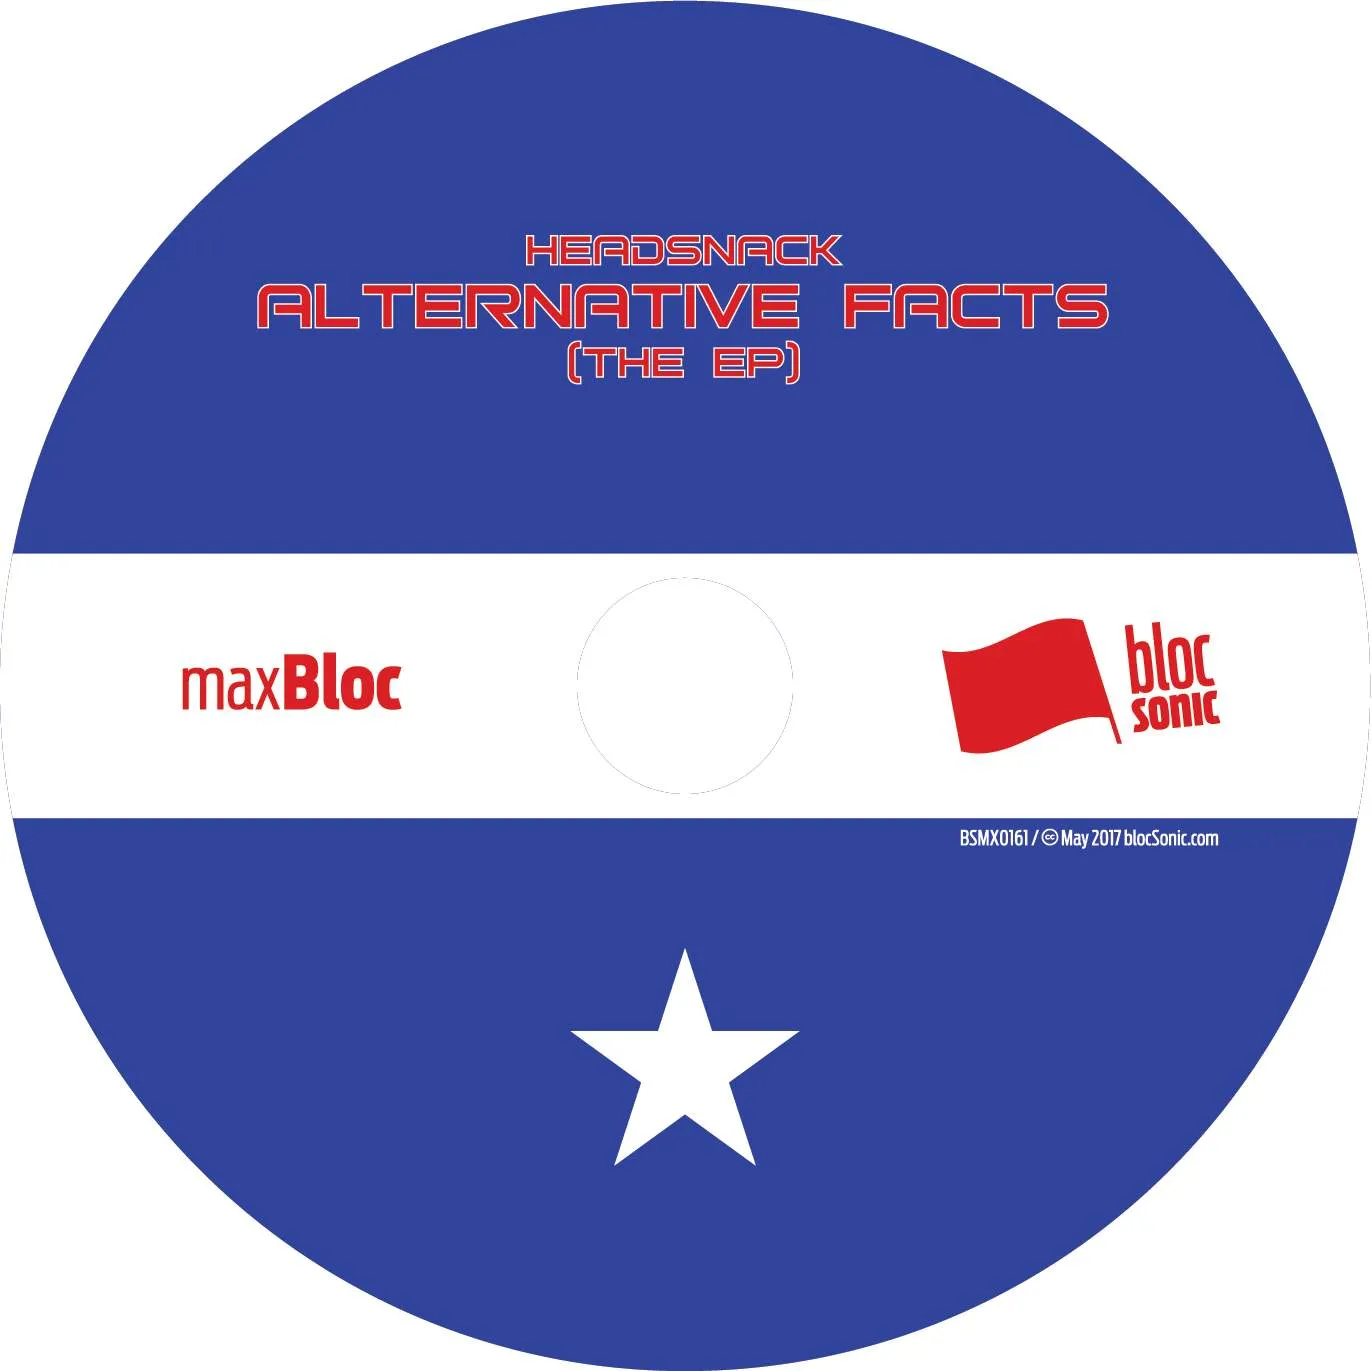 Album disc for “Alternative Facts (The EP)” by Headsnack